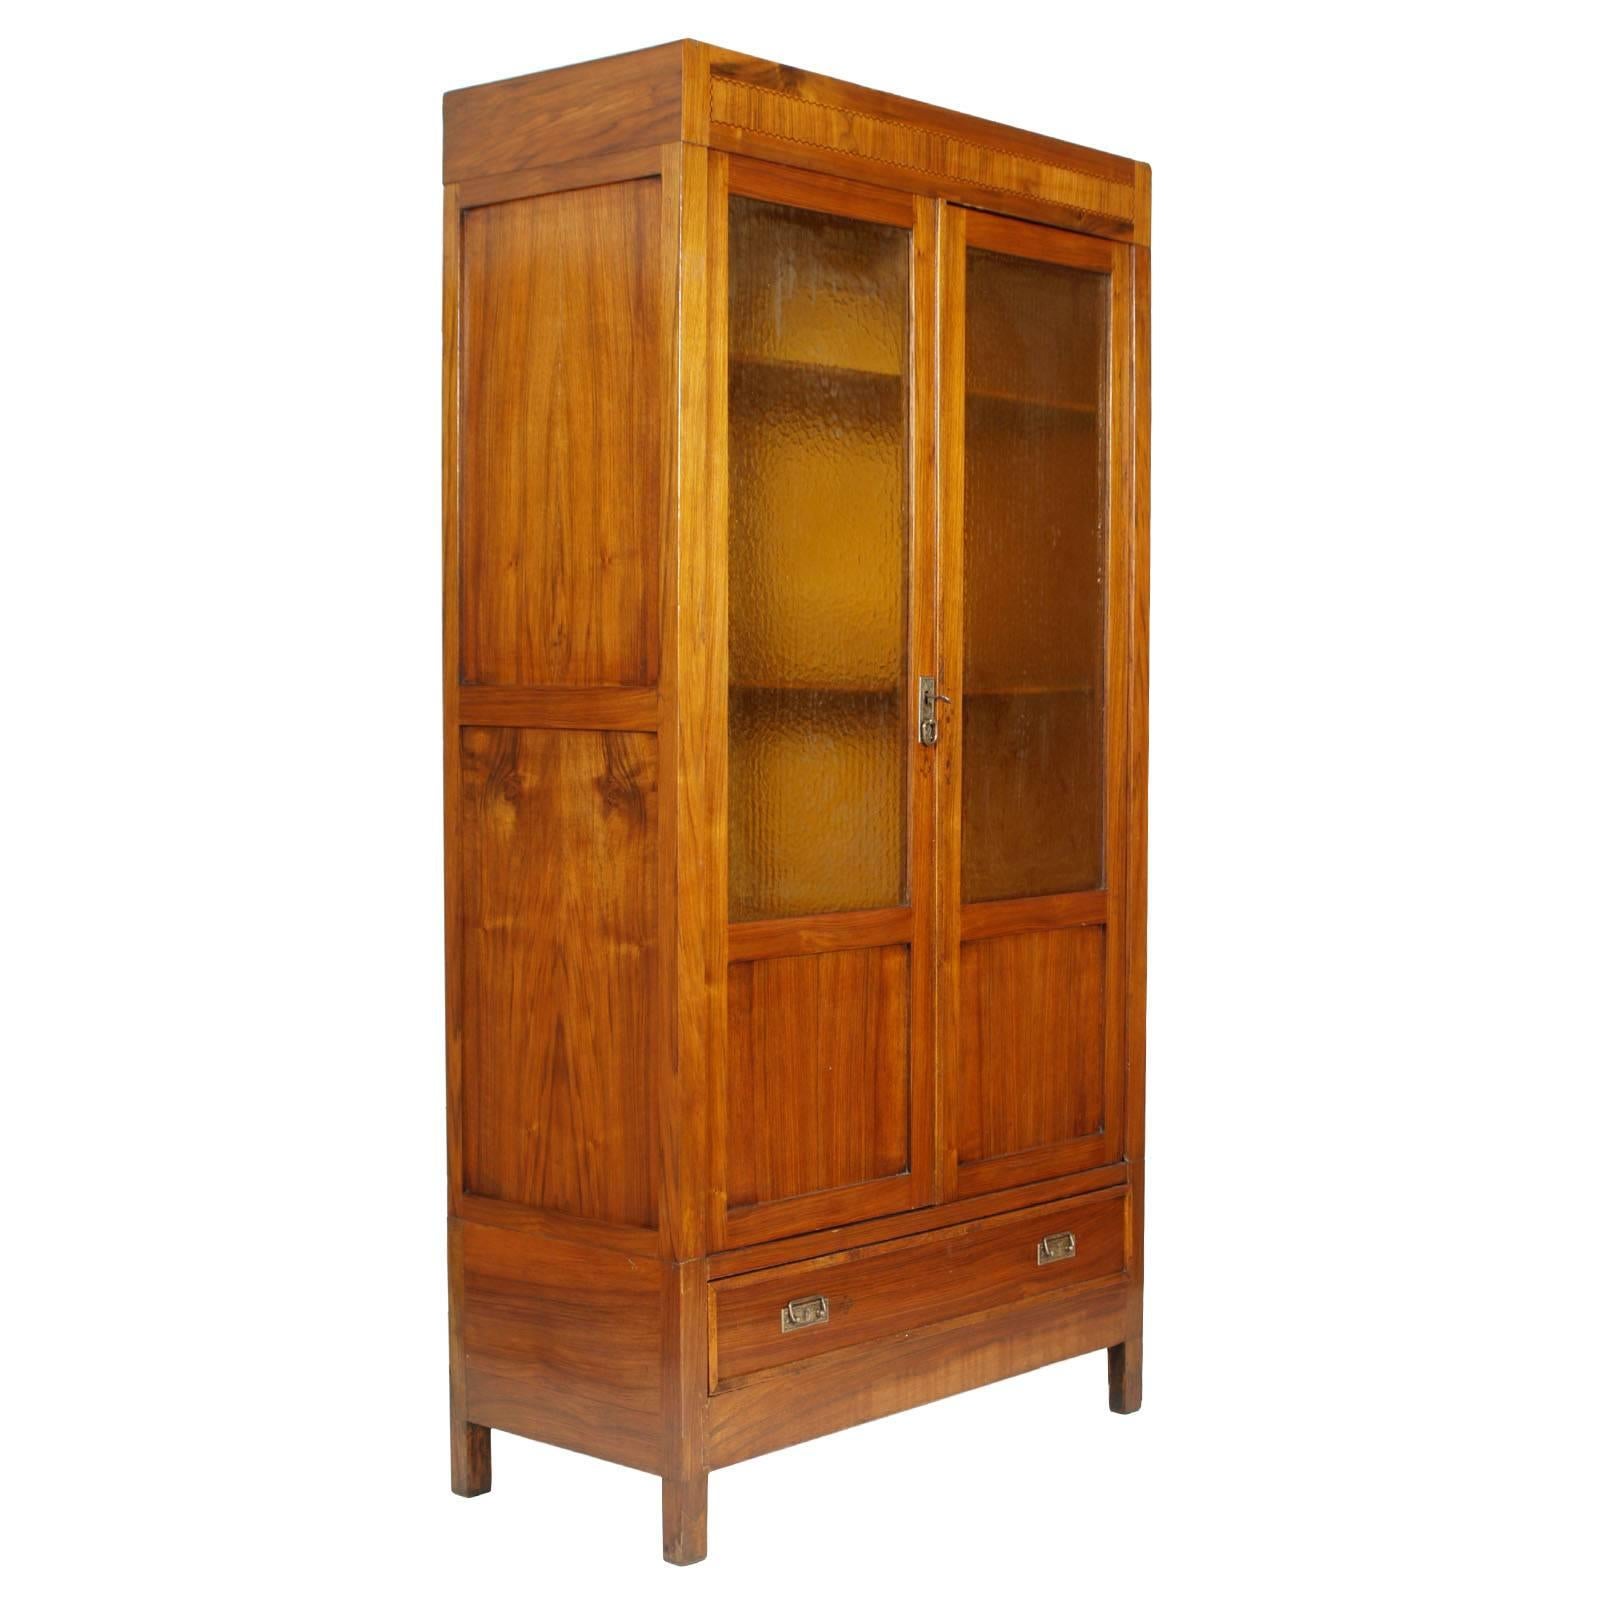 Era Art Nouveau Bookcase Cabinet, in Walnut, with Inlay on Front, Wax-Polished